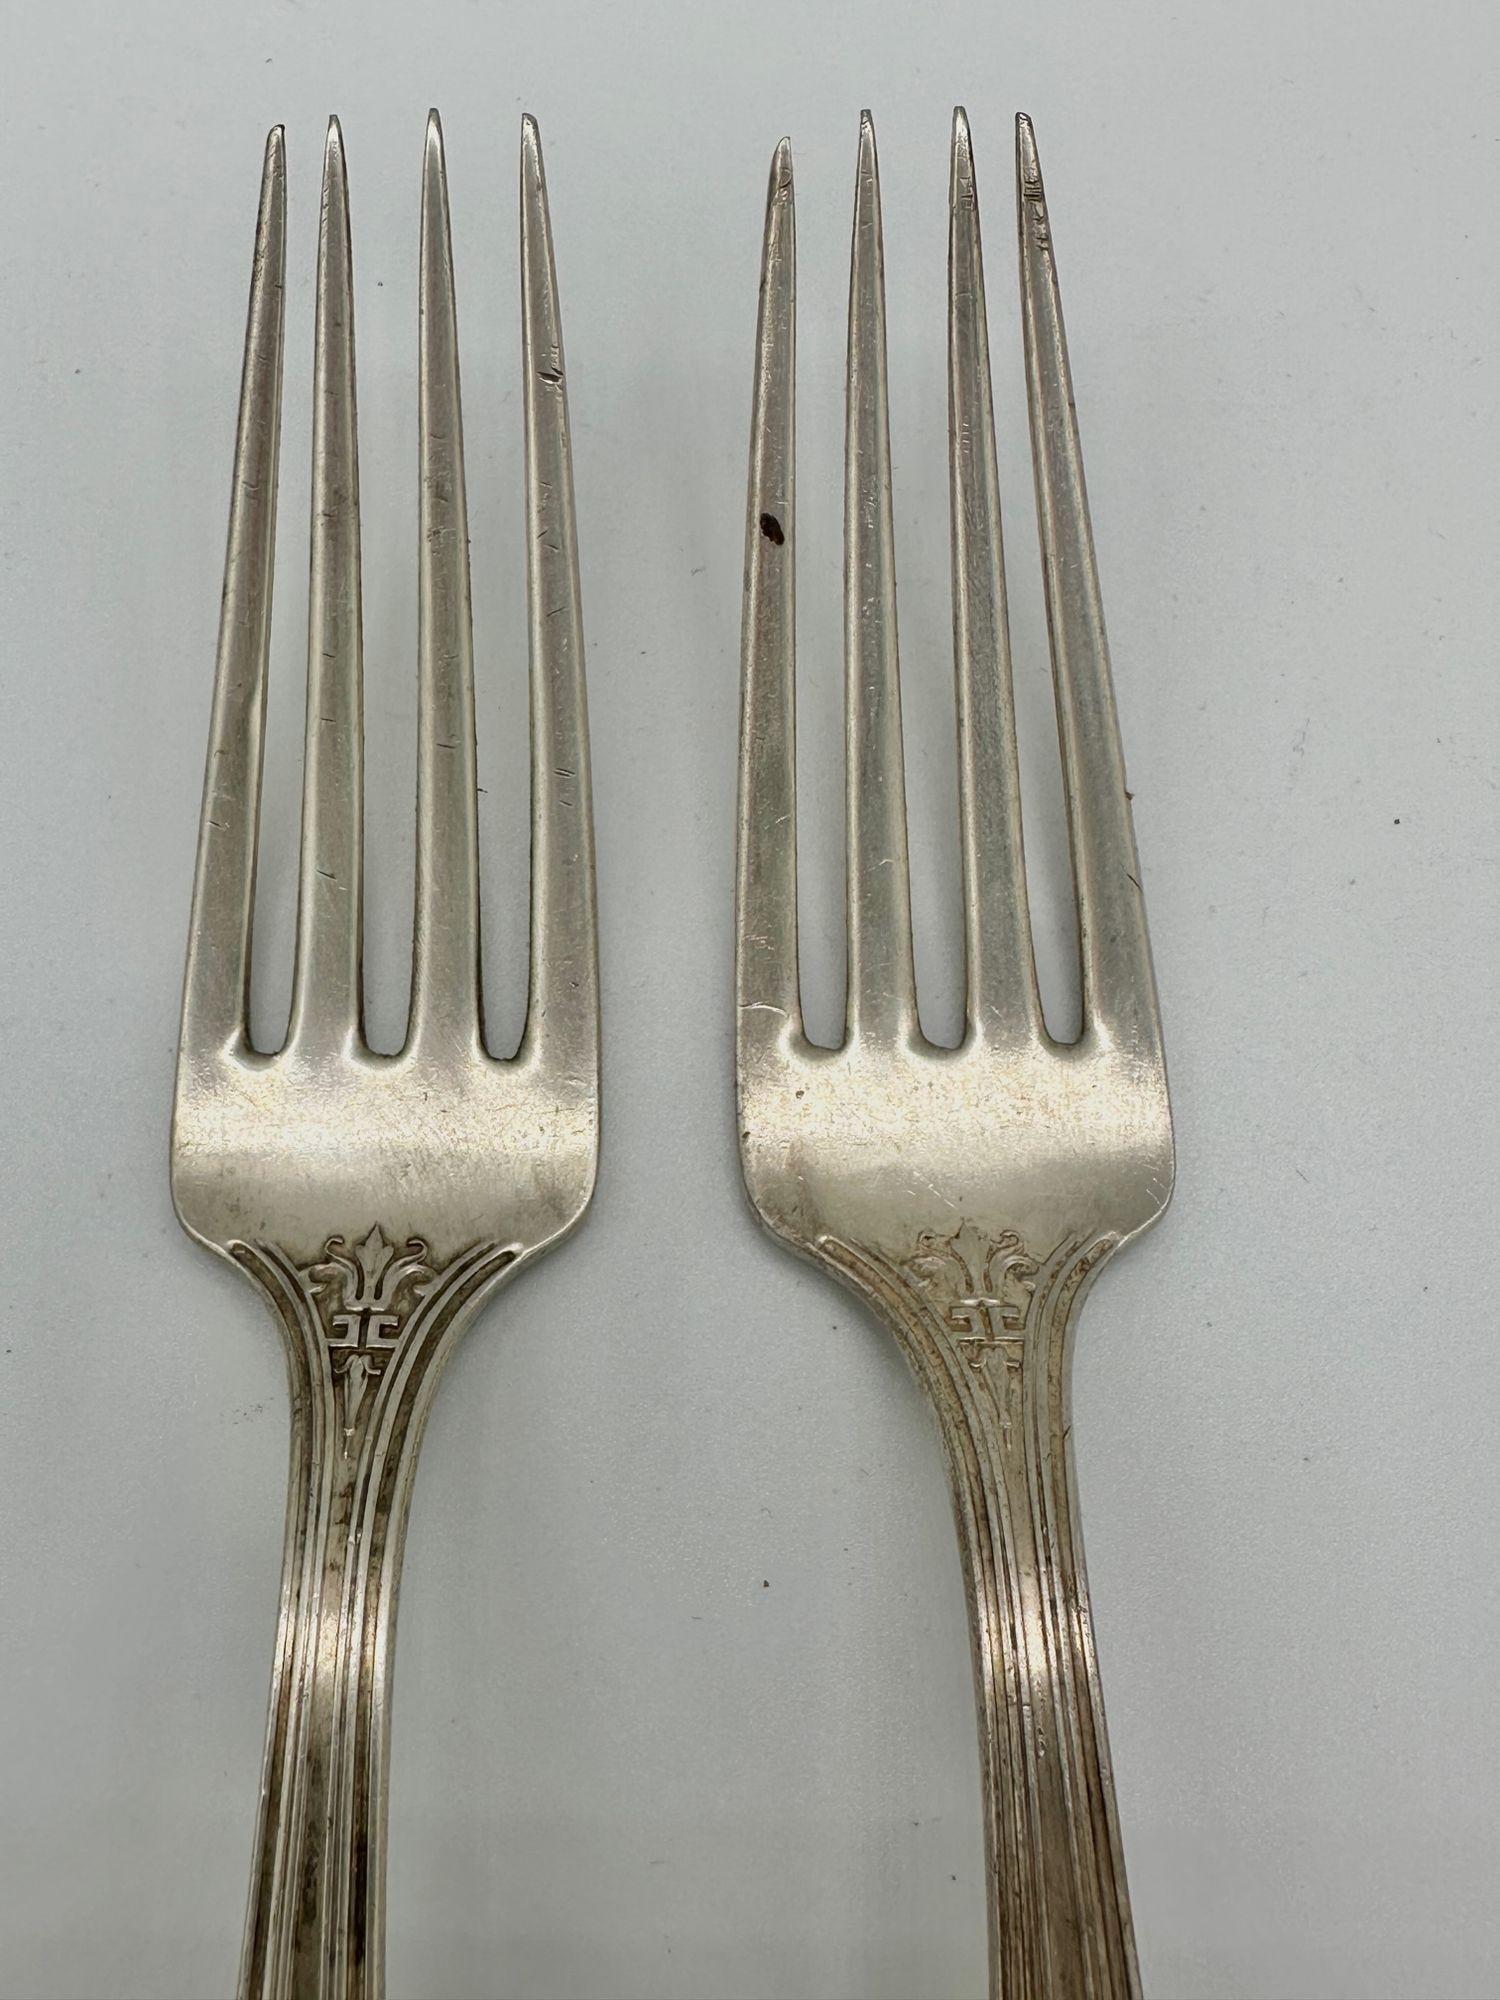 1918 Mandarin Sterling Silverware Set of Four Forks by Whiting Man For Sale 3